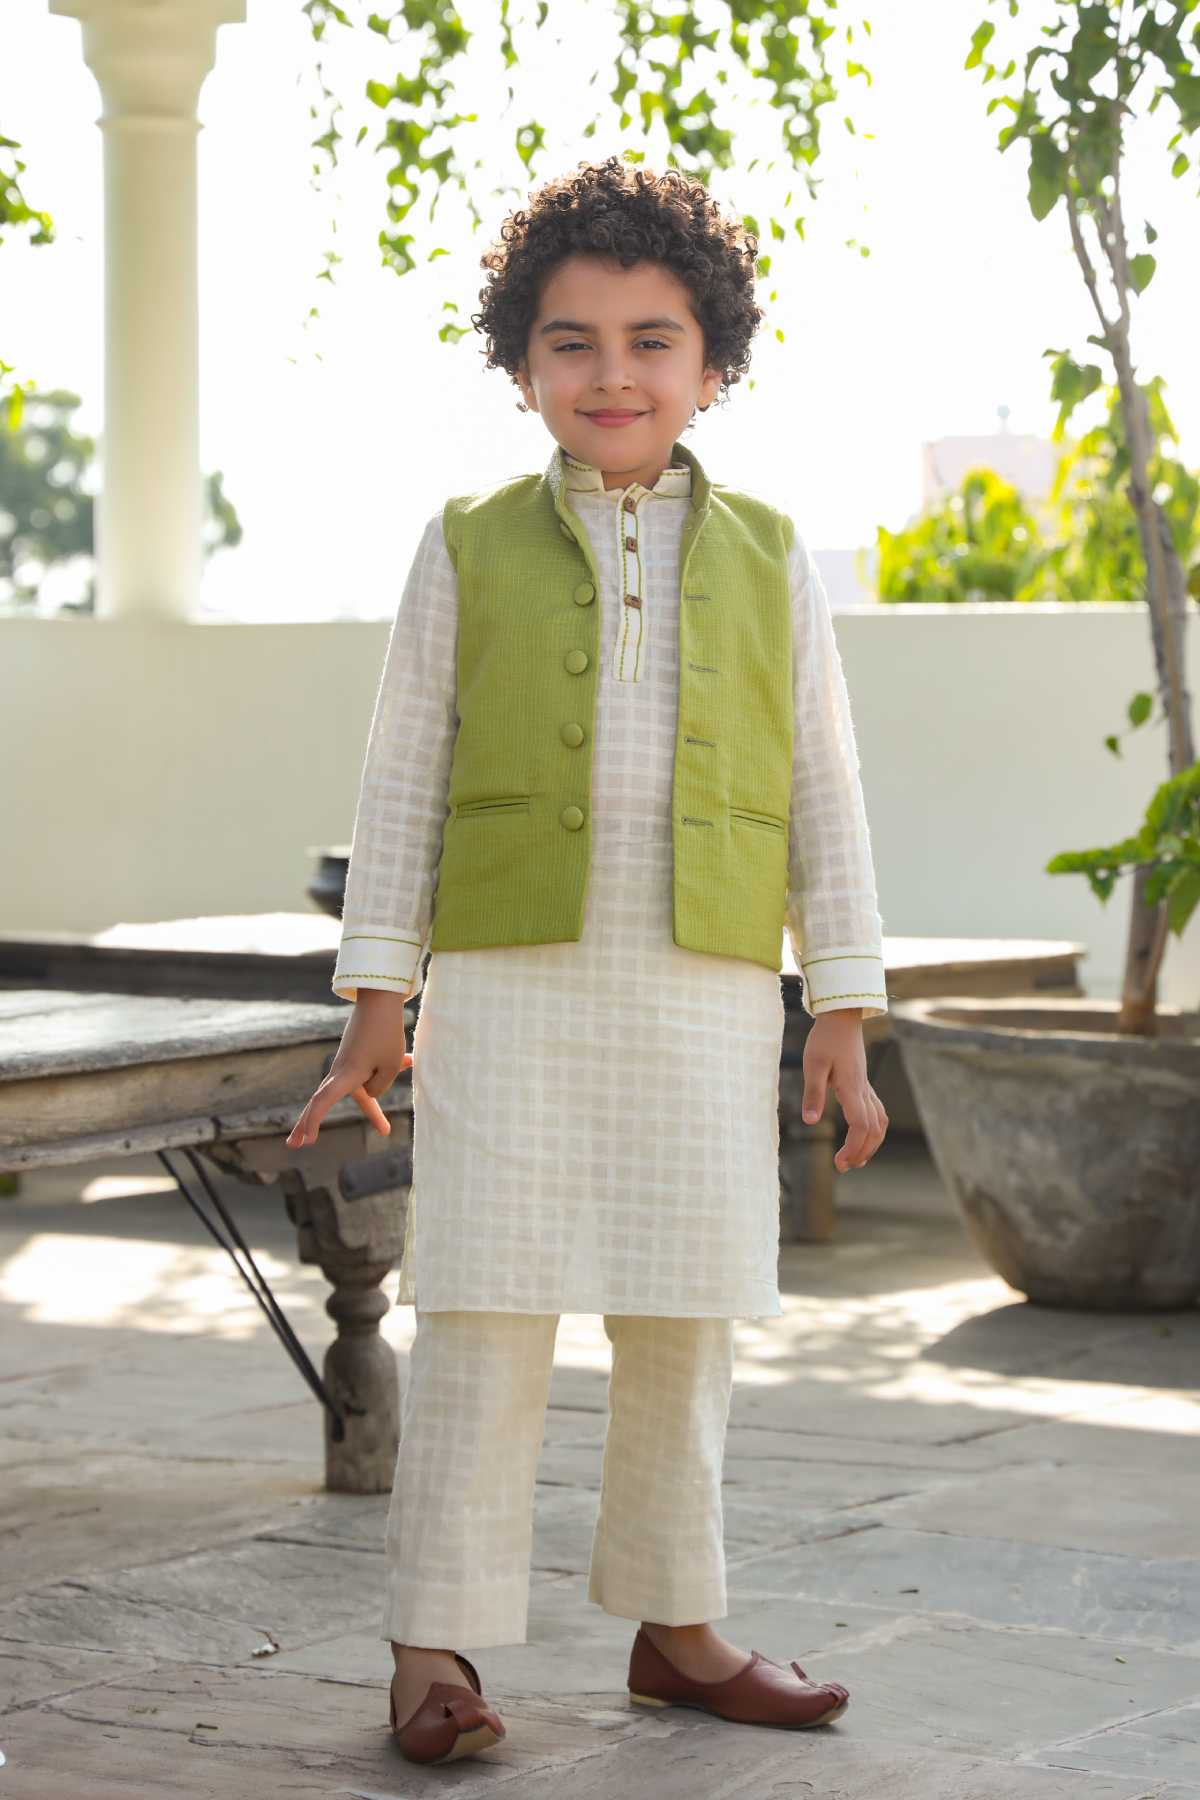 Buy Kids Designer Littleens Hand embroidered nehru jacket with recycled plastic beads in a timeless bouquet intricately embellished on the collar paired with checkered pattern kurta and trousers and Kantha stitch over collar and cuff Online at ScrollnShops